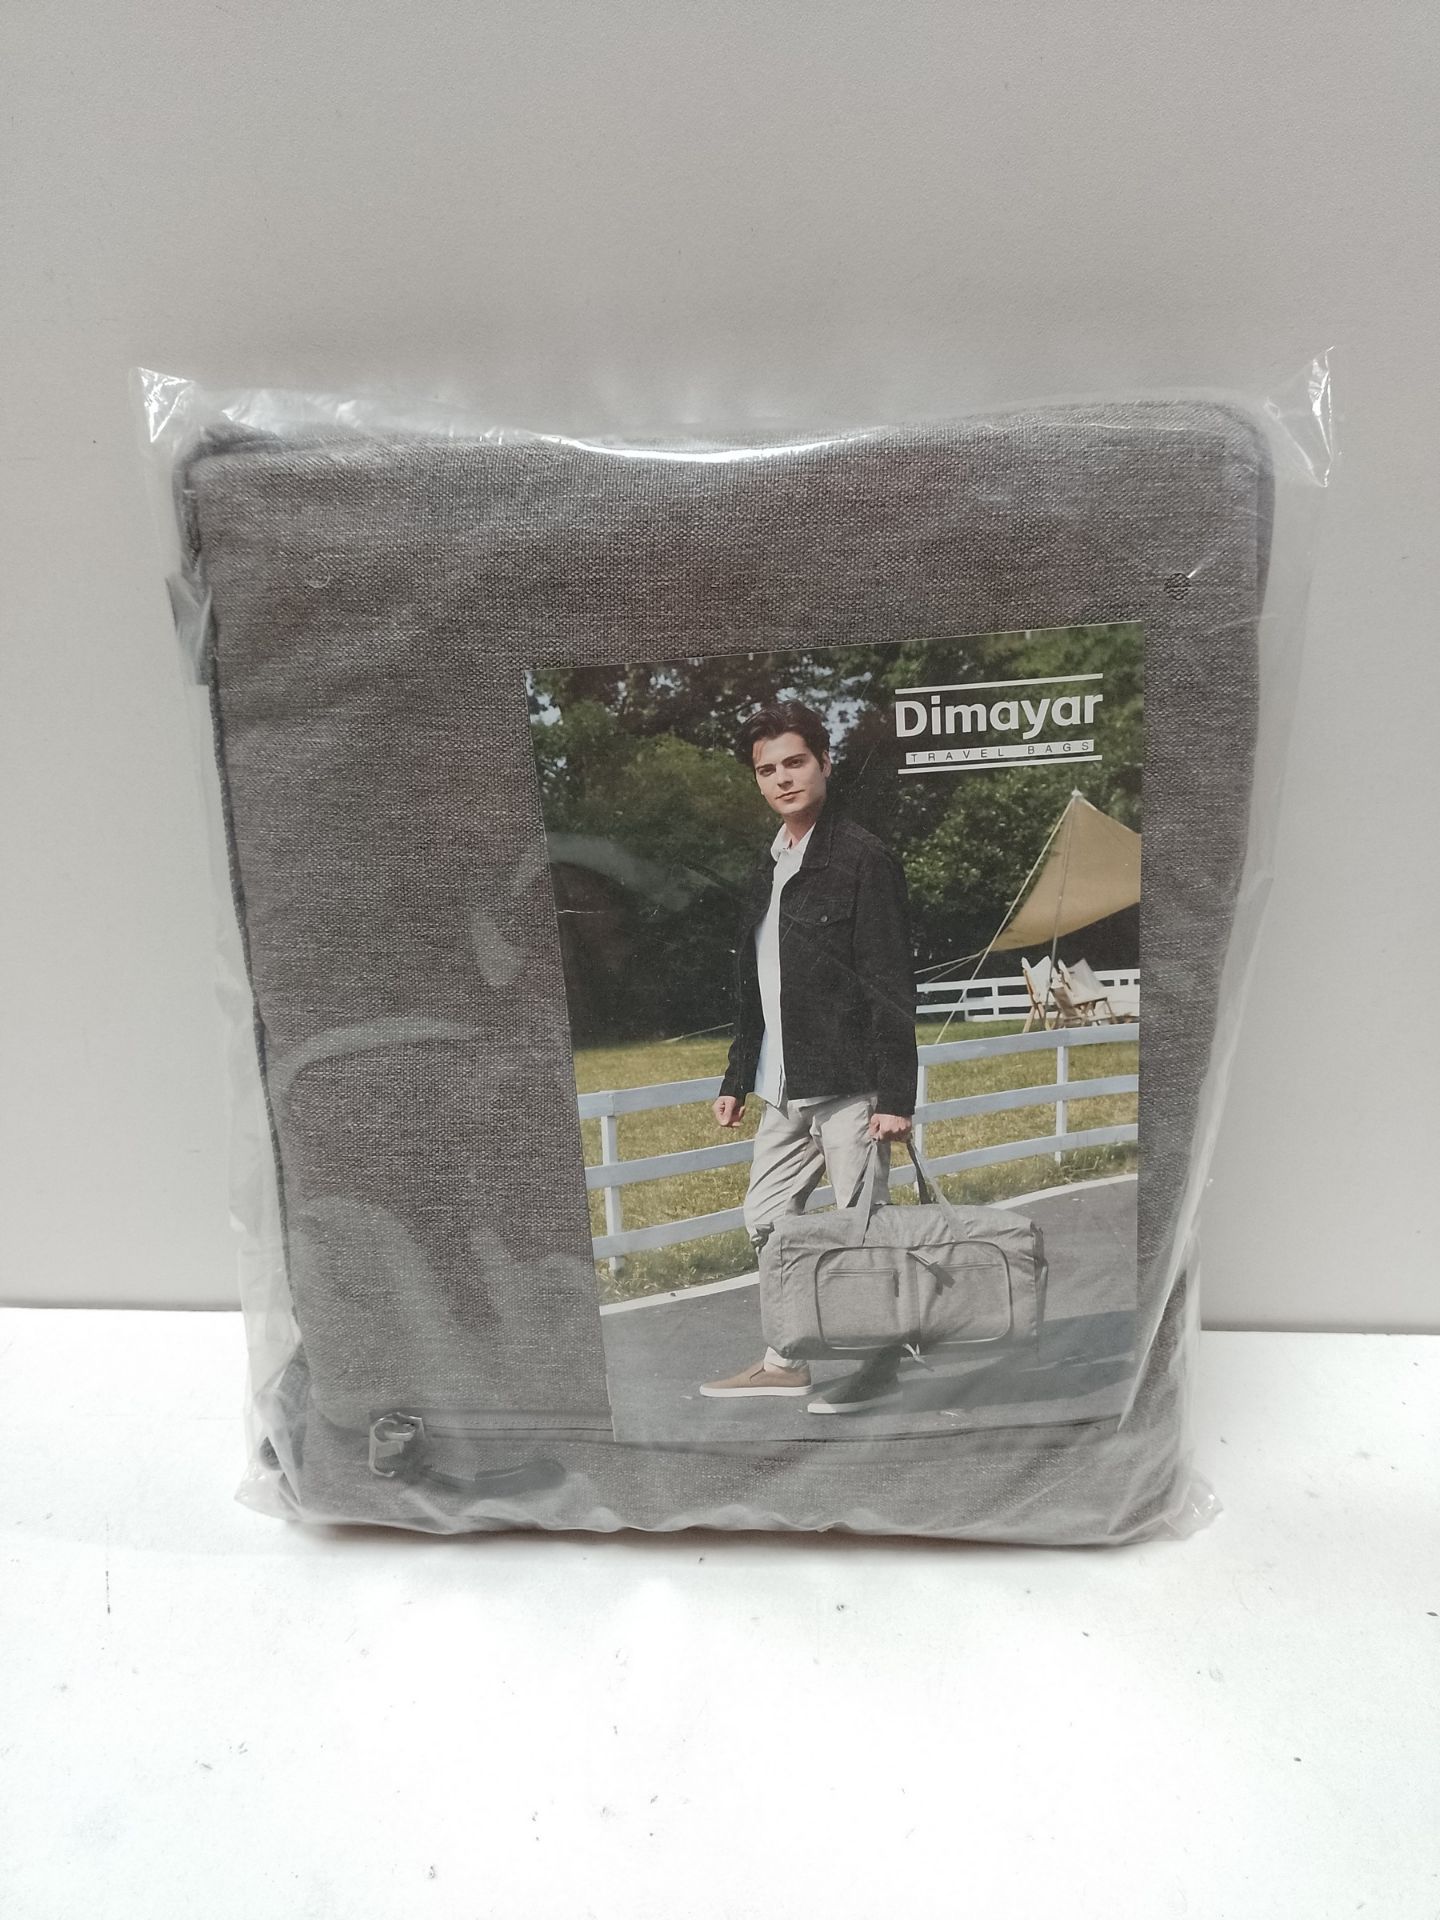 RRP £45.65 BRAND NEW STOCK Dimayar Large 115L Holdall Bag for Women - Image 2 of 2